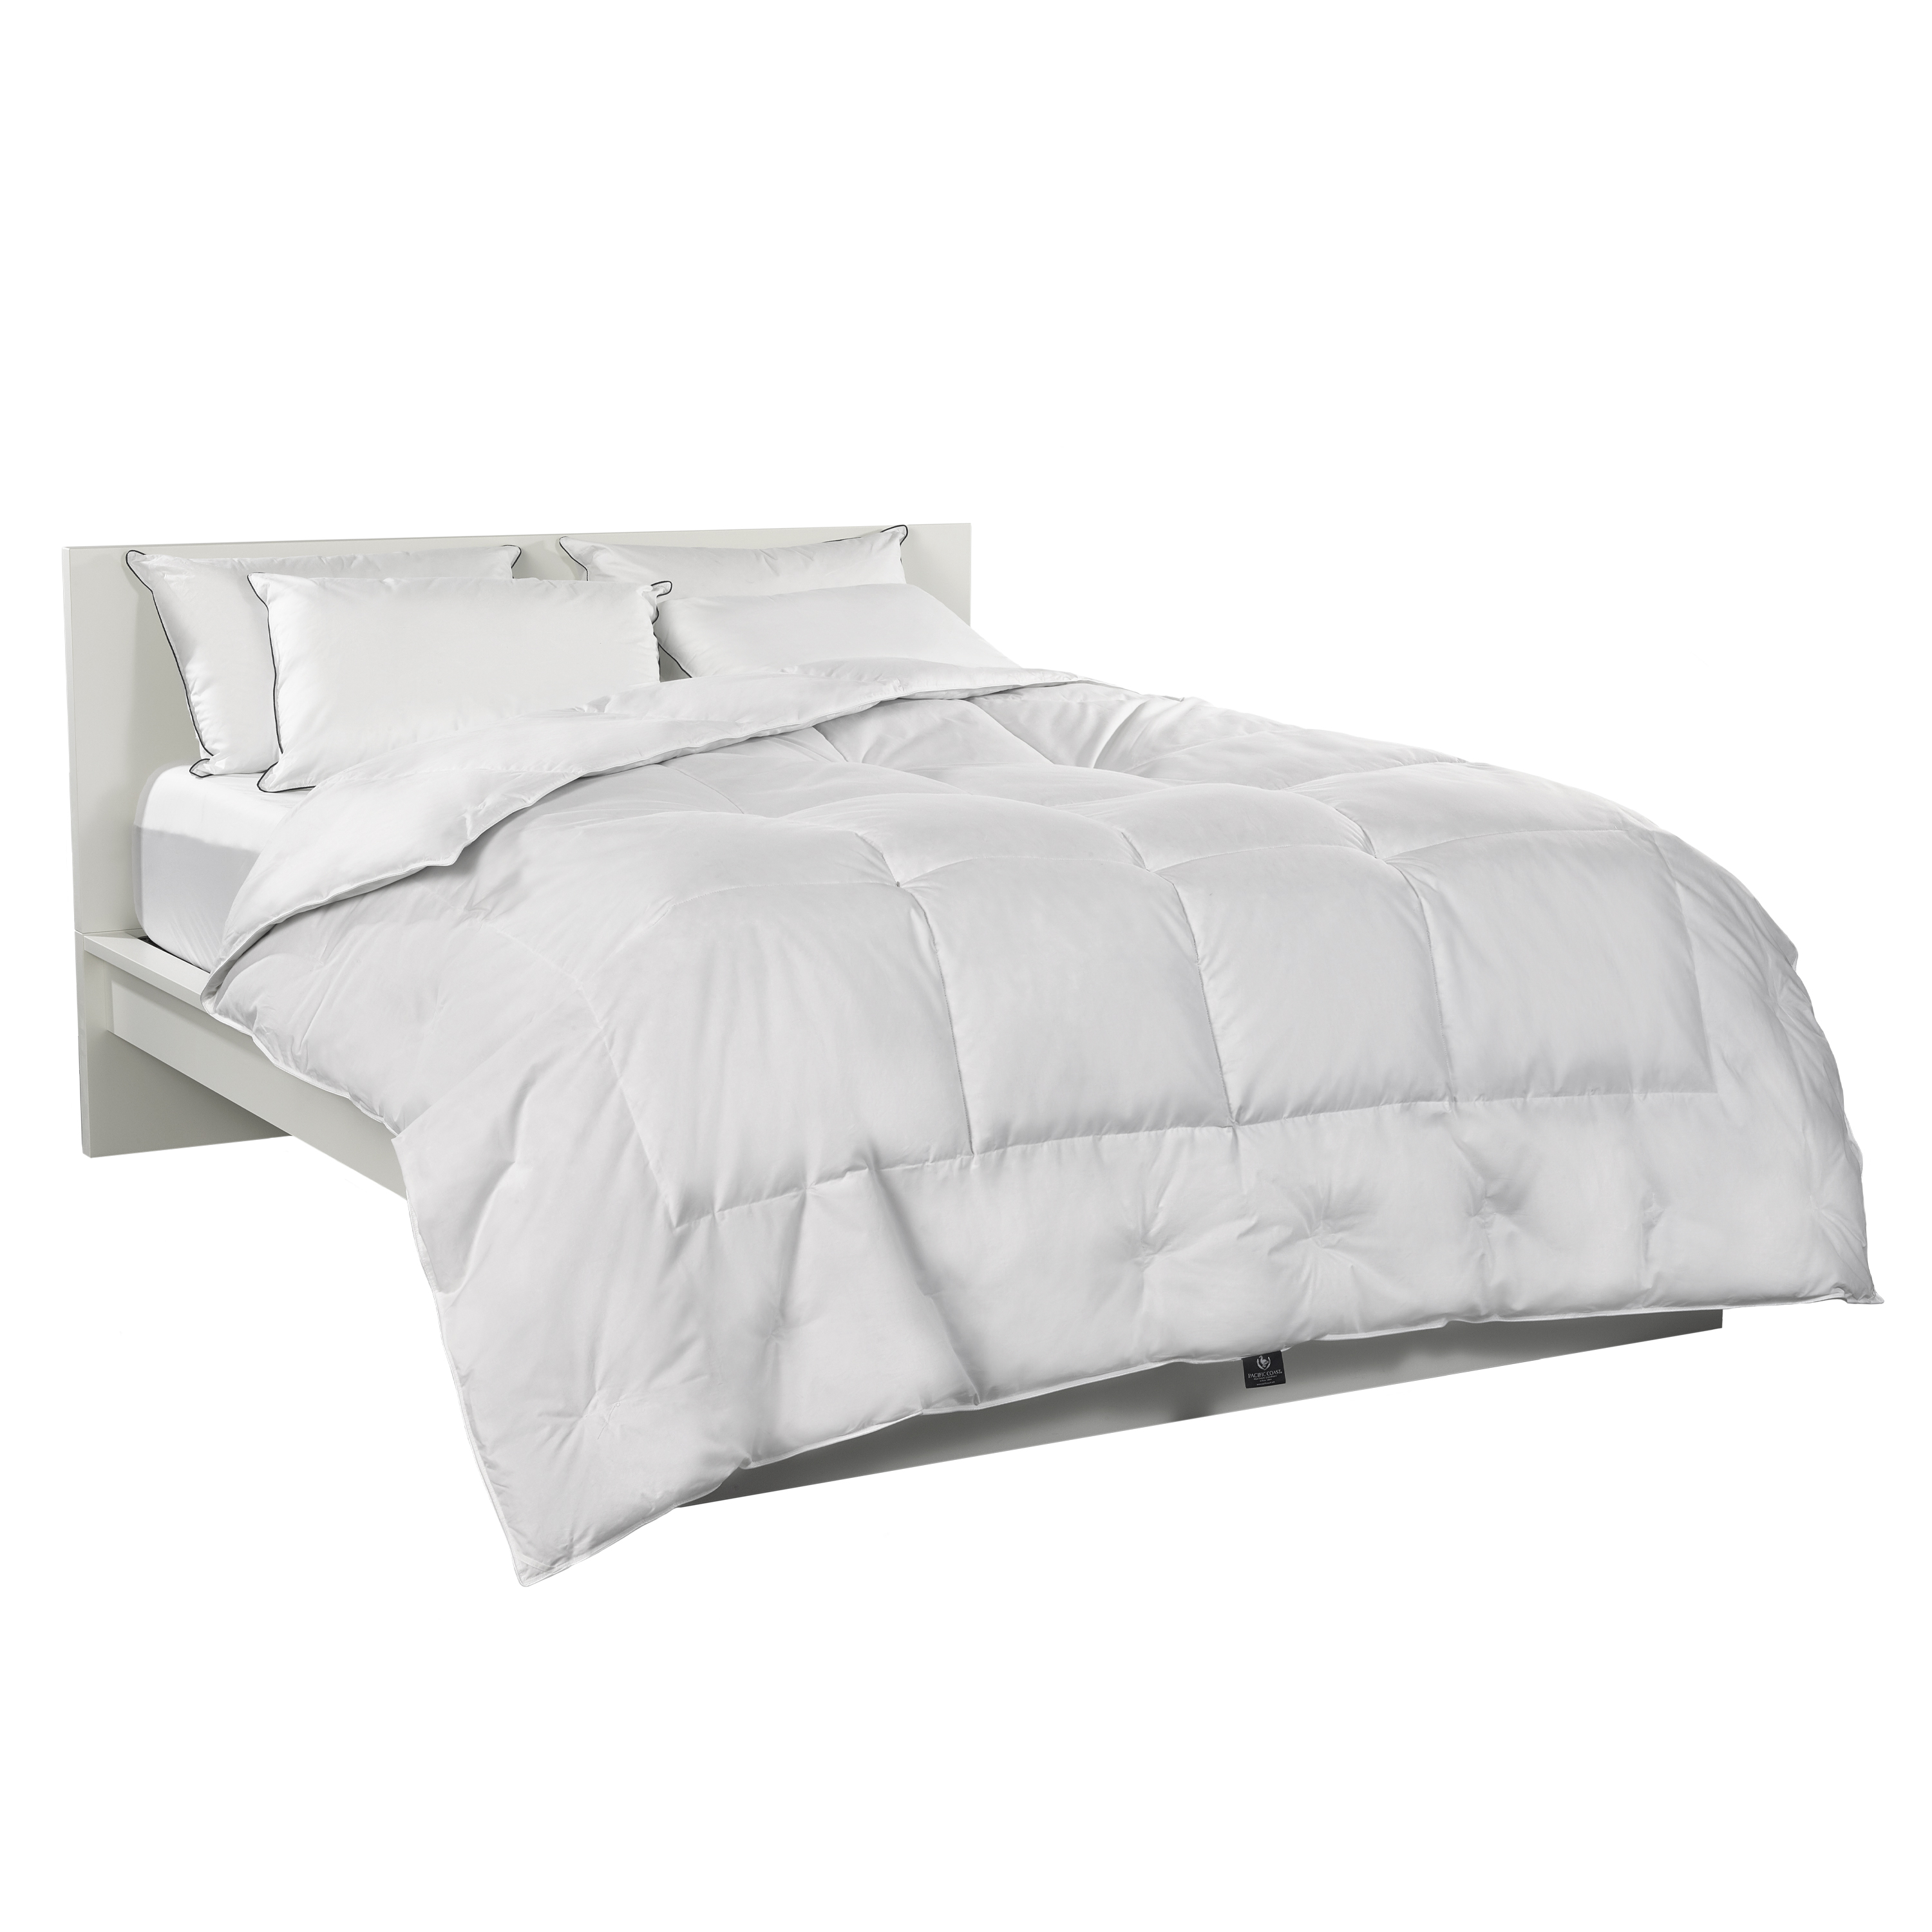 Pacific Coast Down Comforter King Size Cozy White Down Allerrest Fabric New 